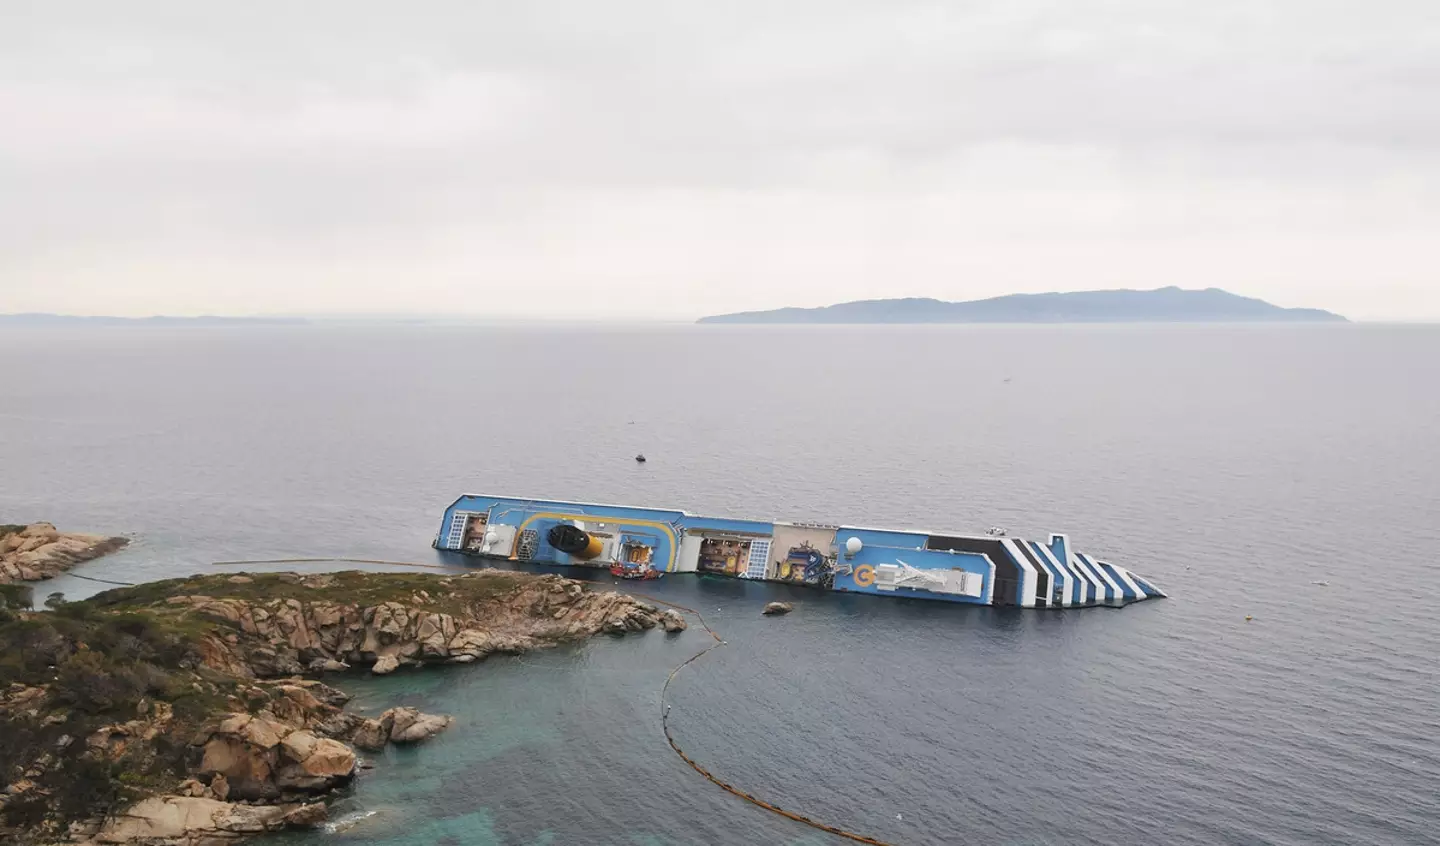 The Costa Concordia sank off the coast of Italy 12 years ago.